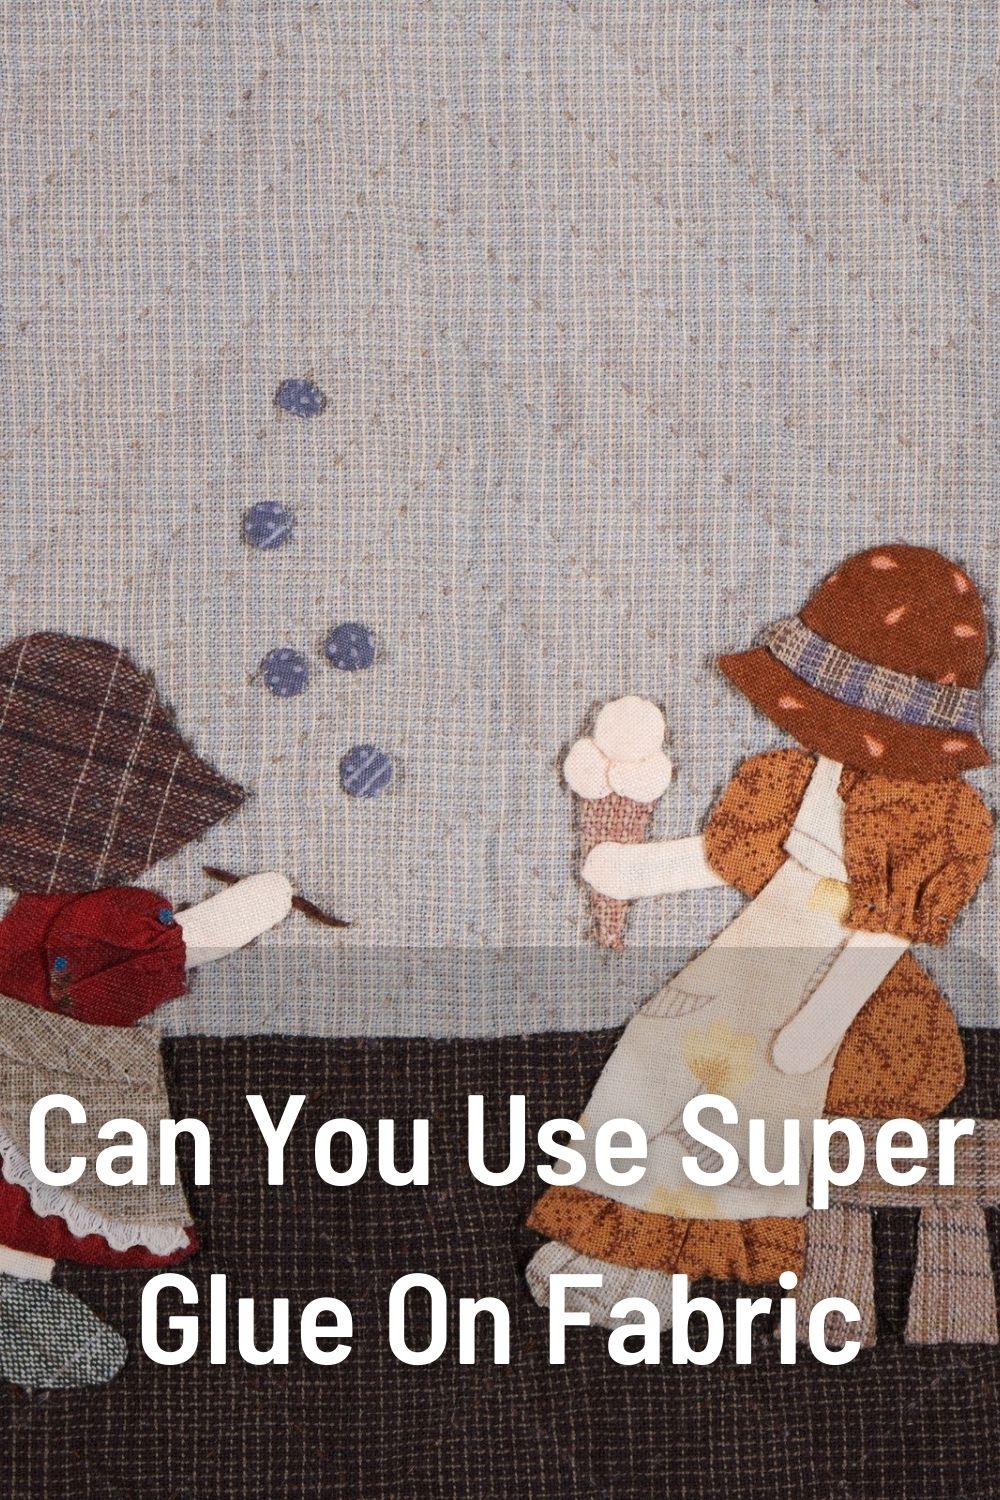 Can You Use Super Glue On Fabric